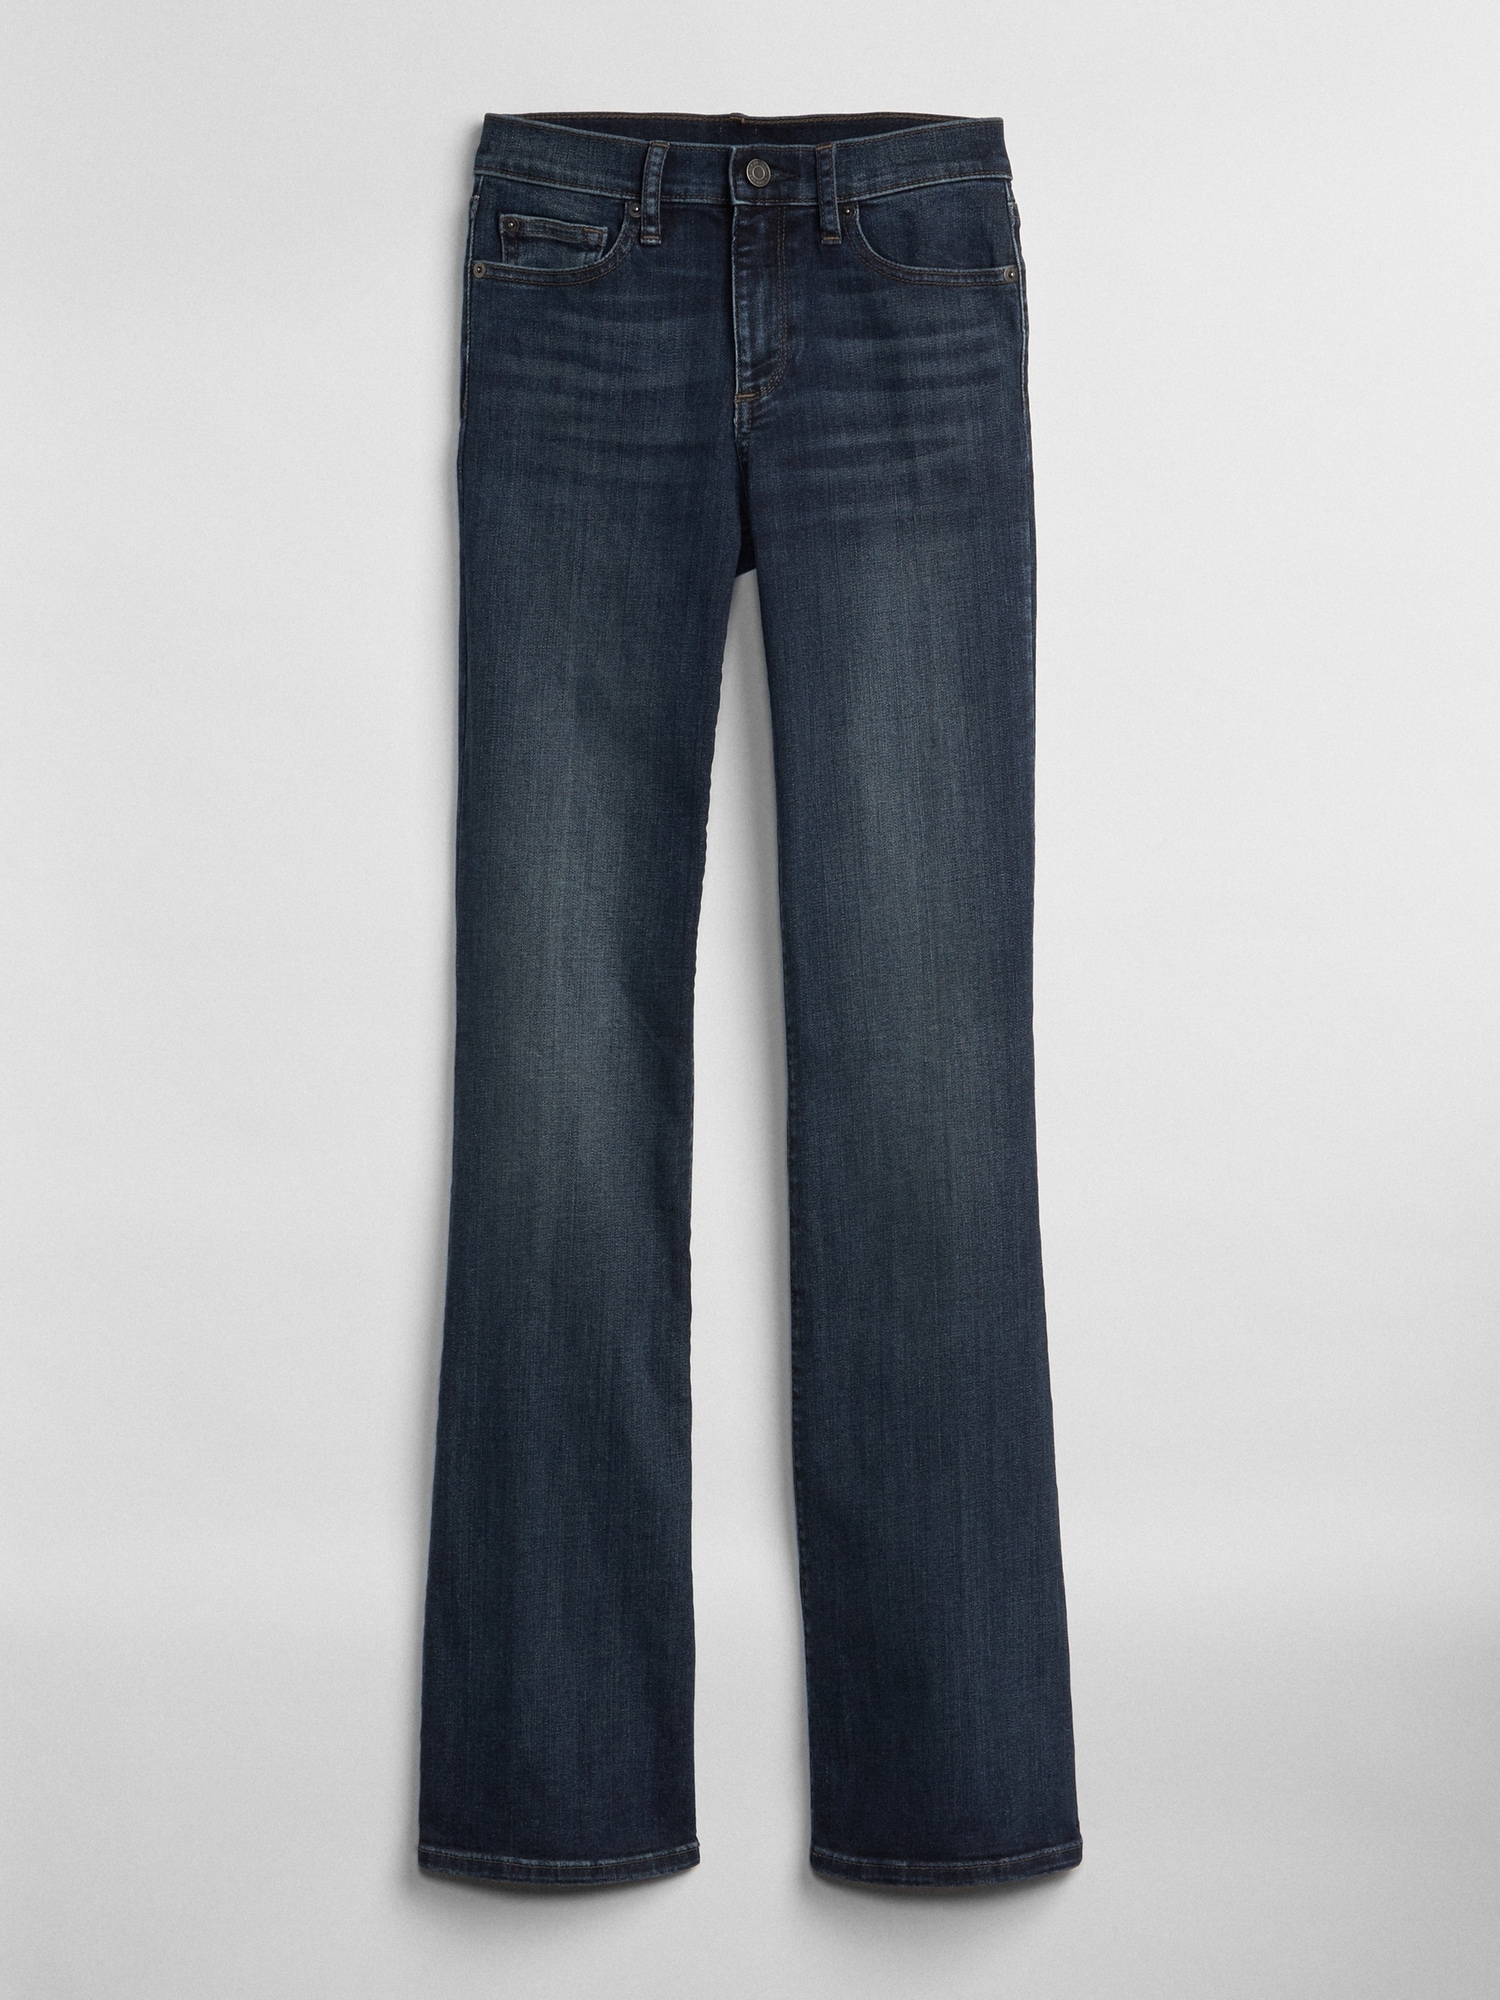 mid rise perfect boot jeans